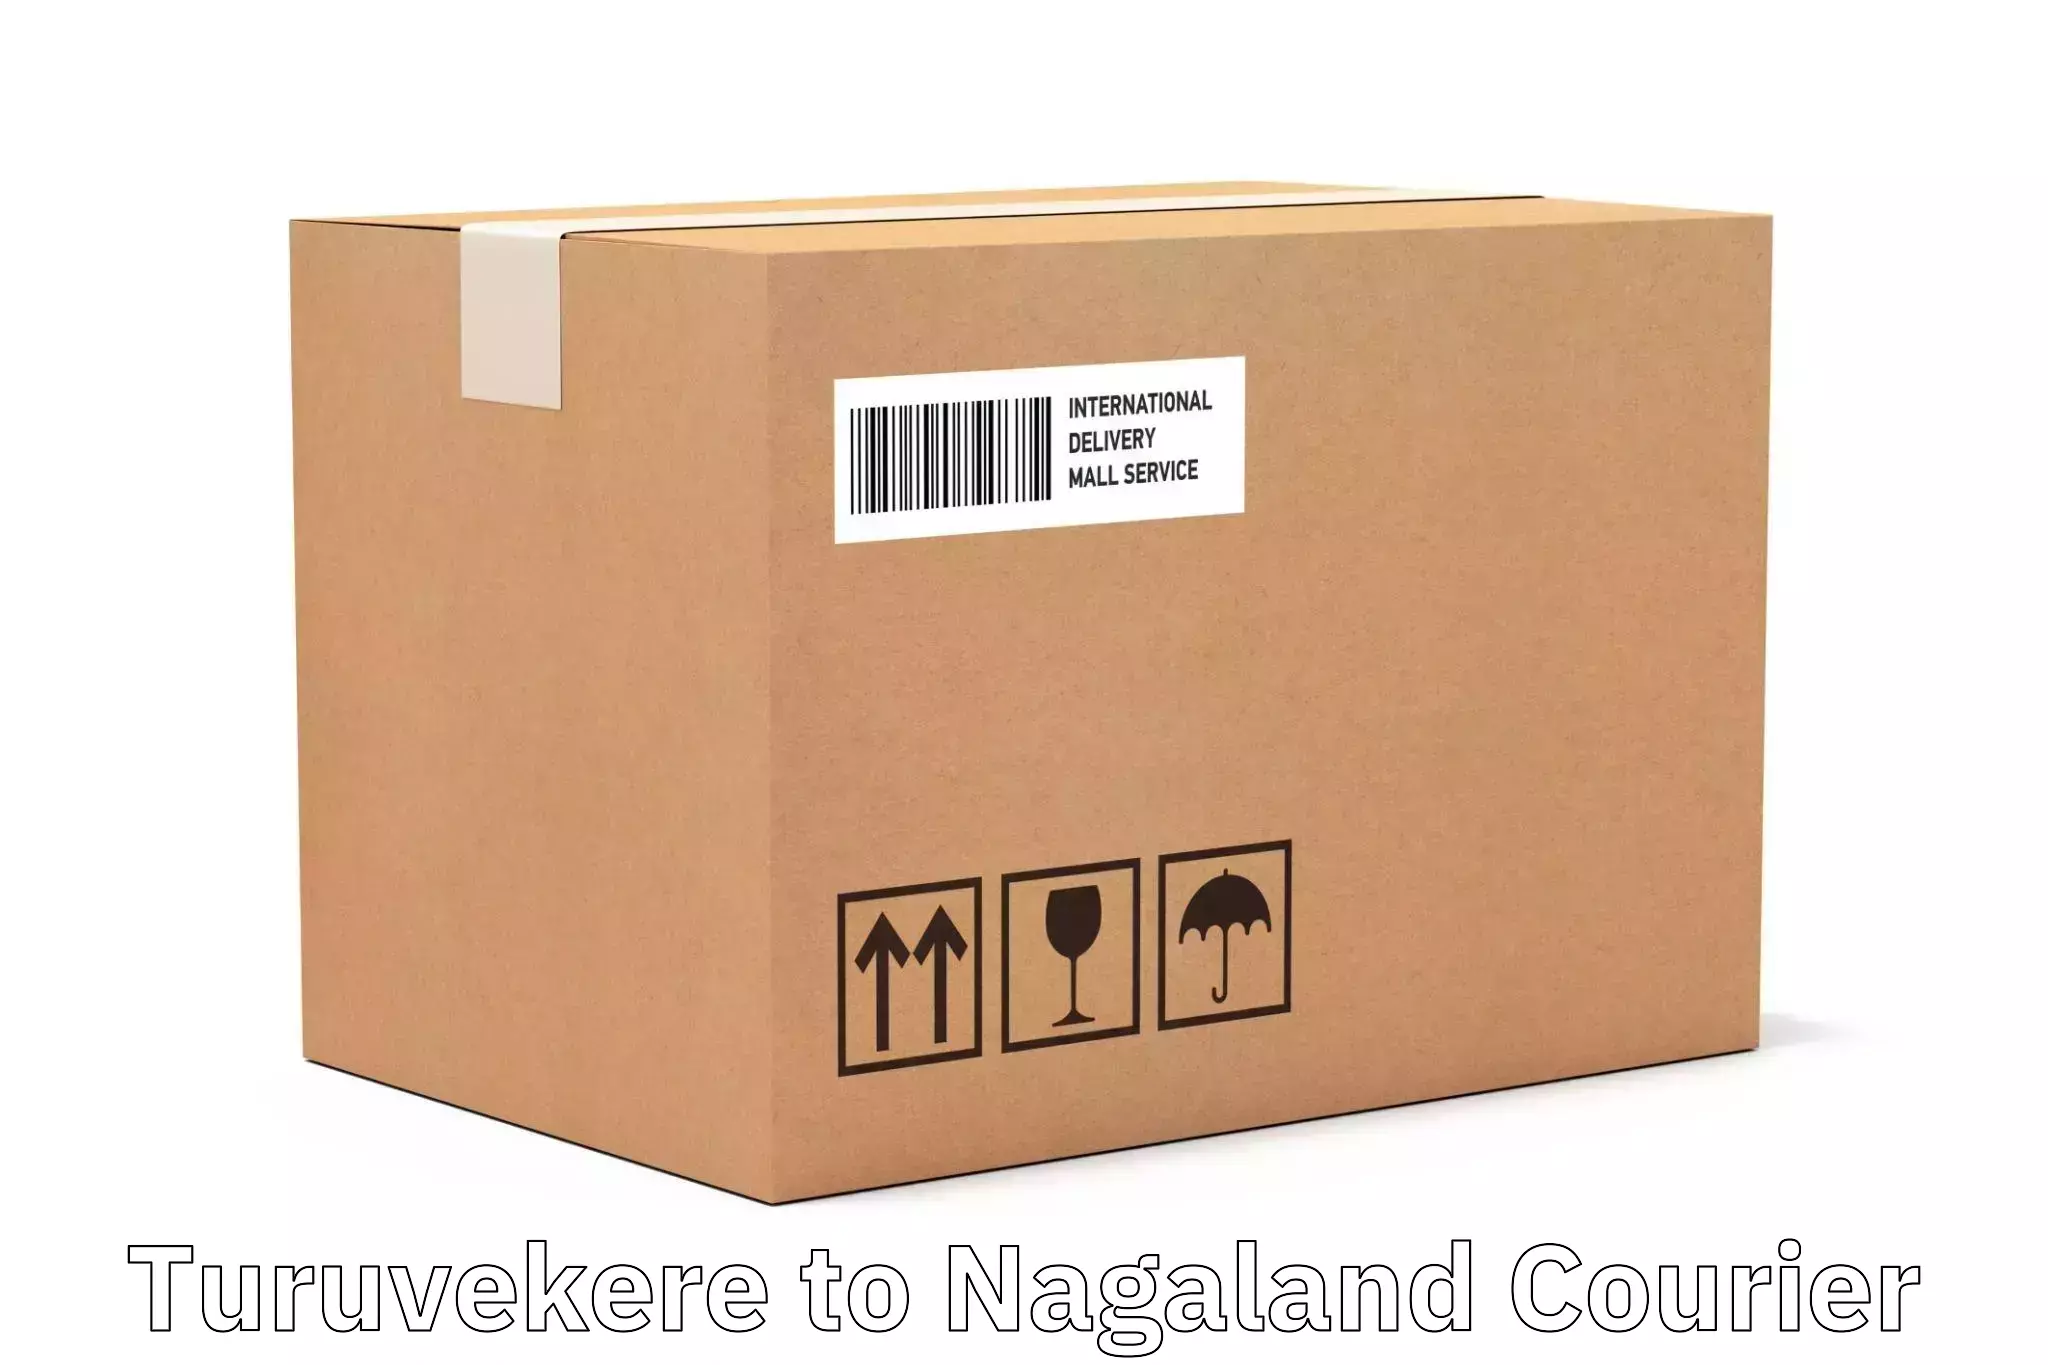 Versatile courier offerings Turuvekere to Nagaland